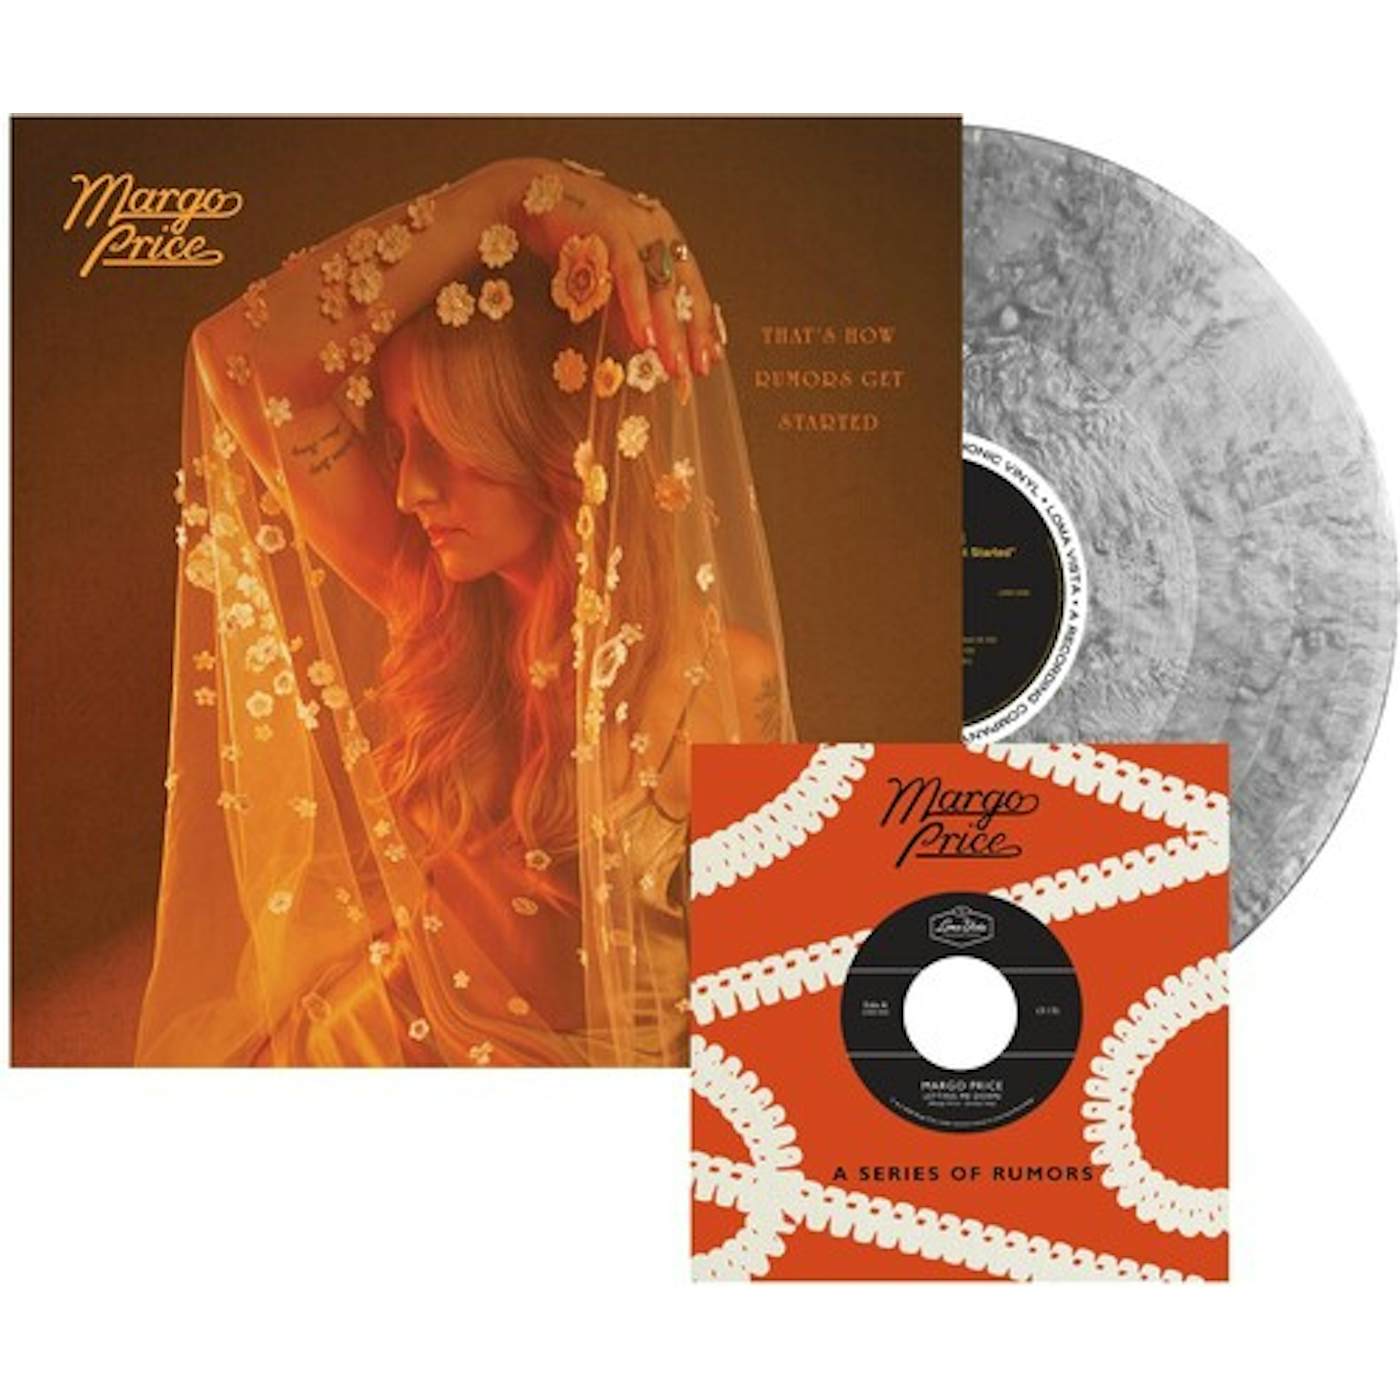 Margo Price That's How Rumors Get Started (Silver LP + 7" Single) (Vinyl)